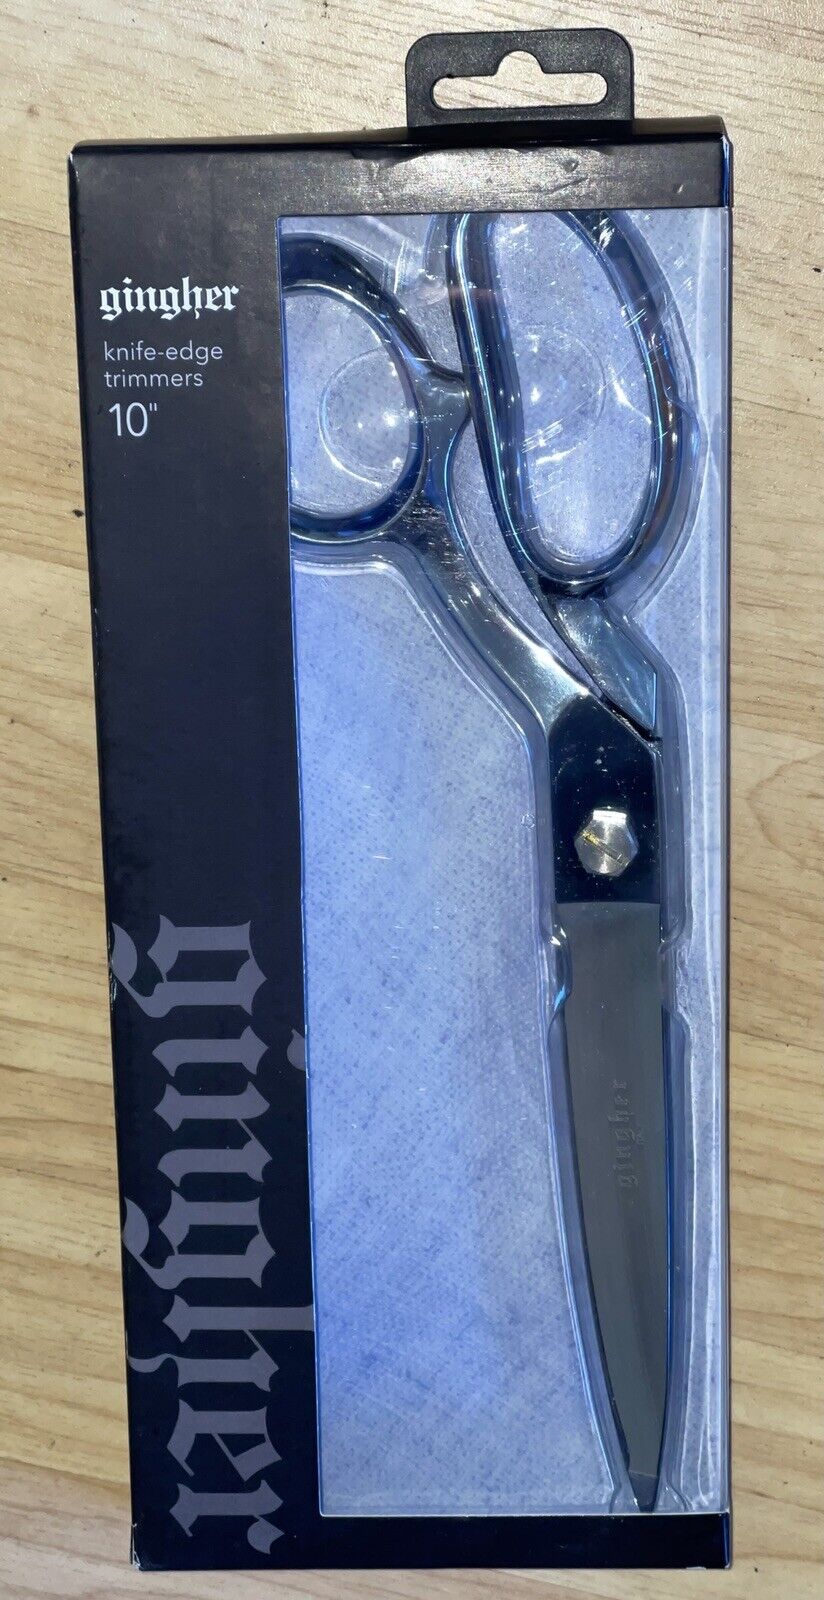 Gingher Knife-Edge Trimmers 10" NEW IN BOX